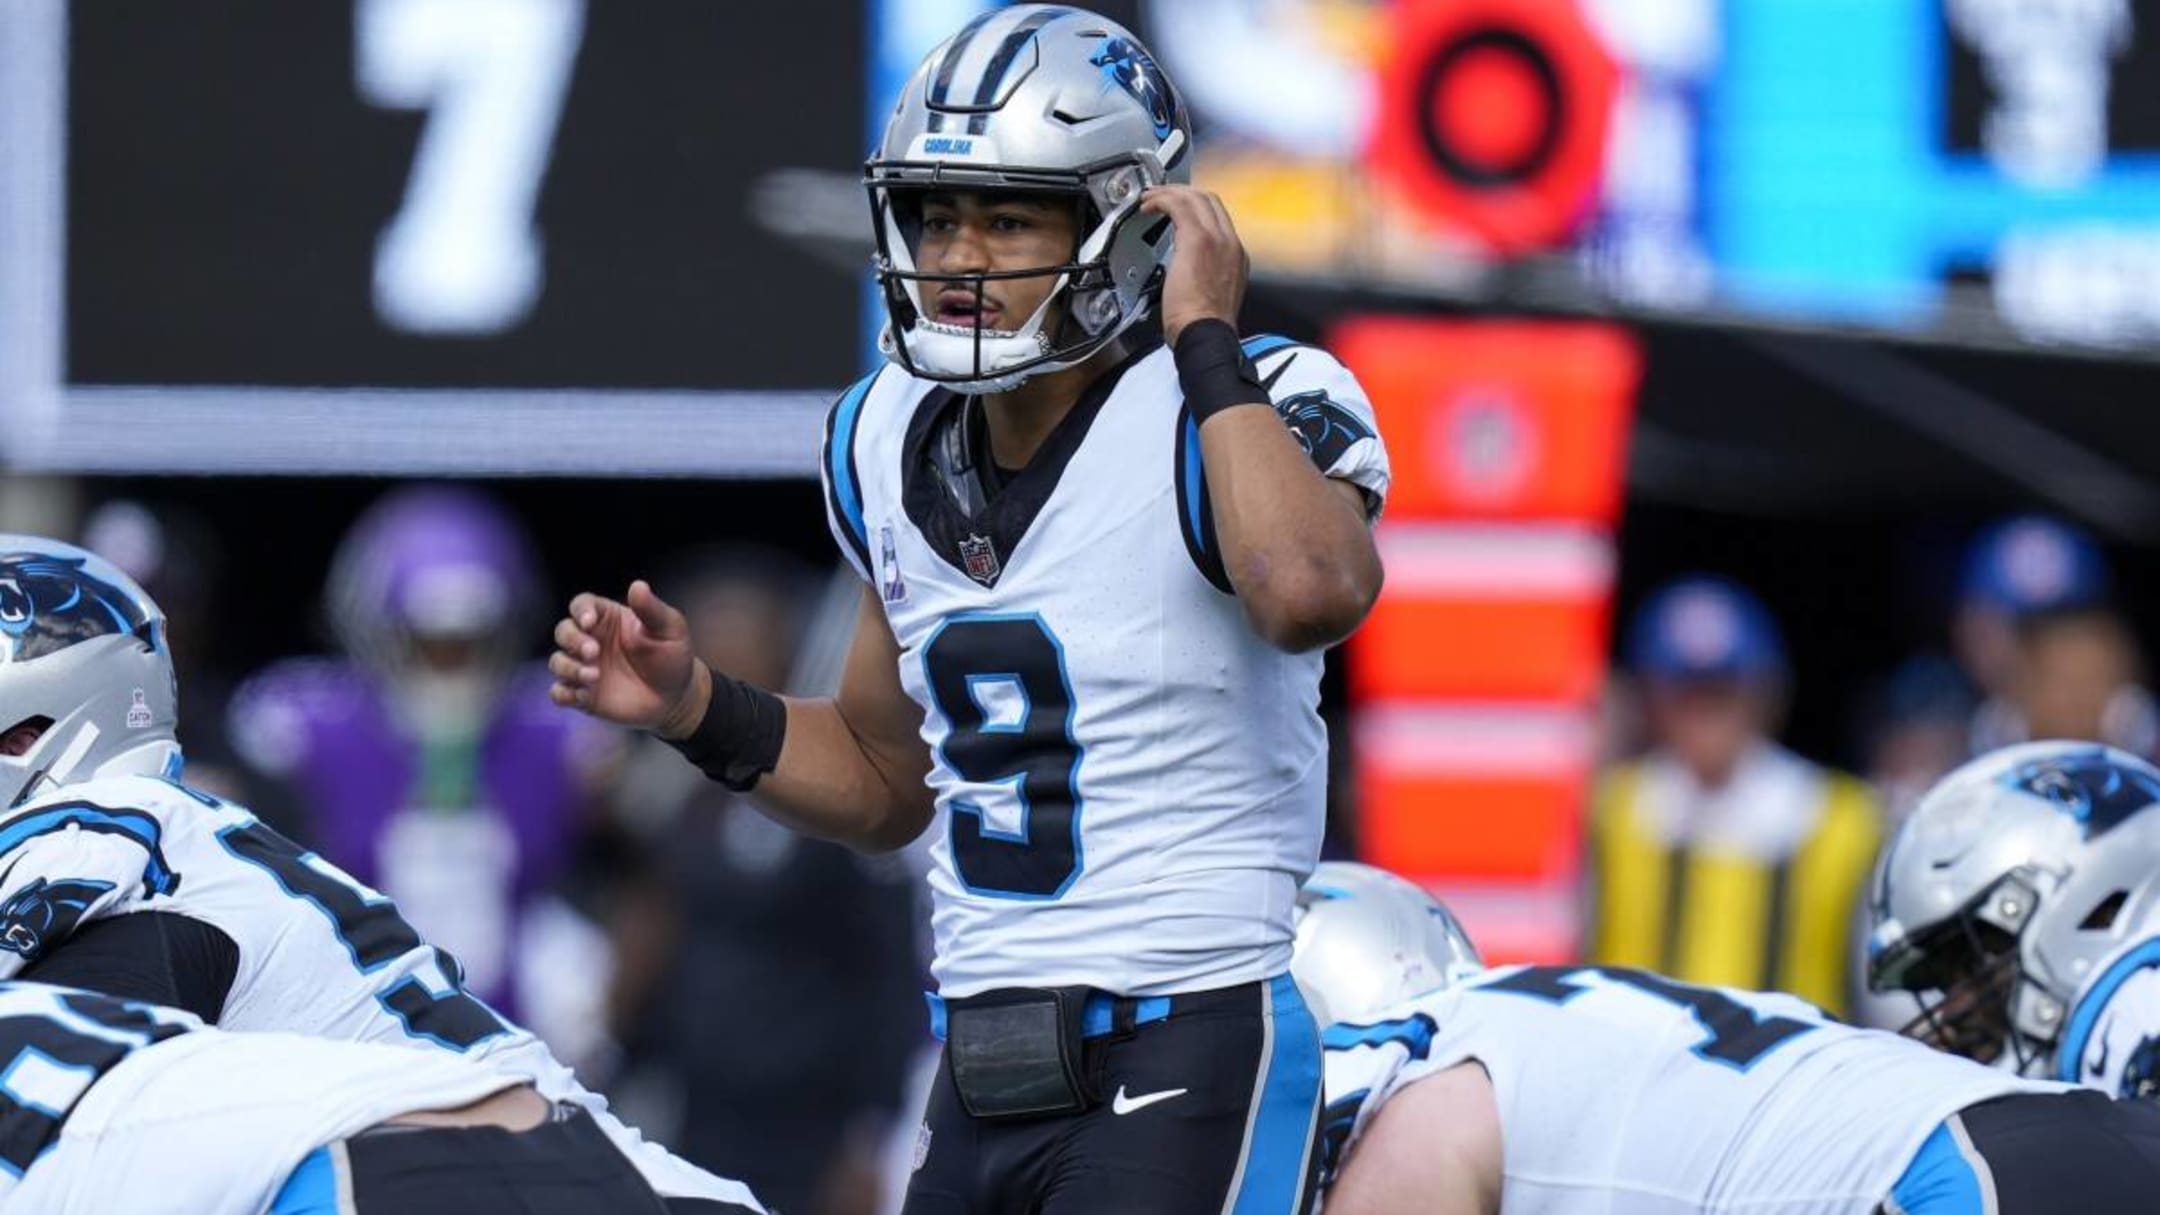 How Long Will the Panthers Remain Winless?